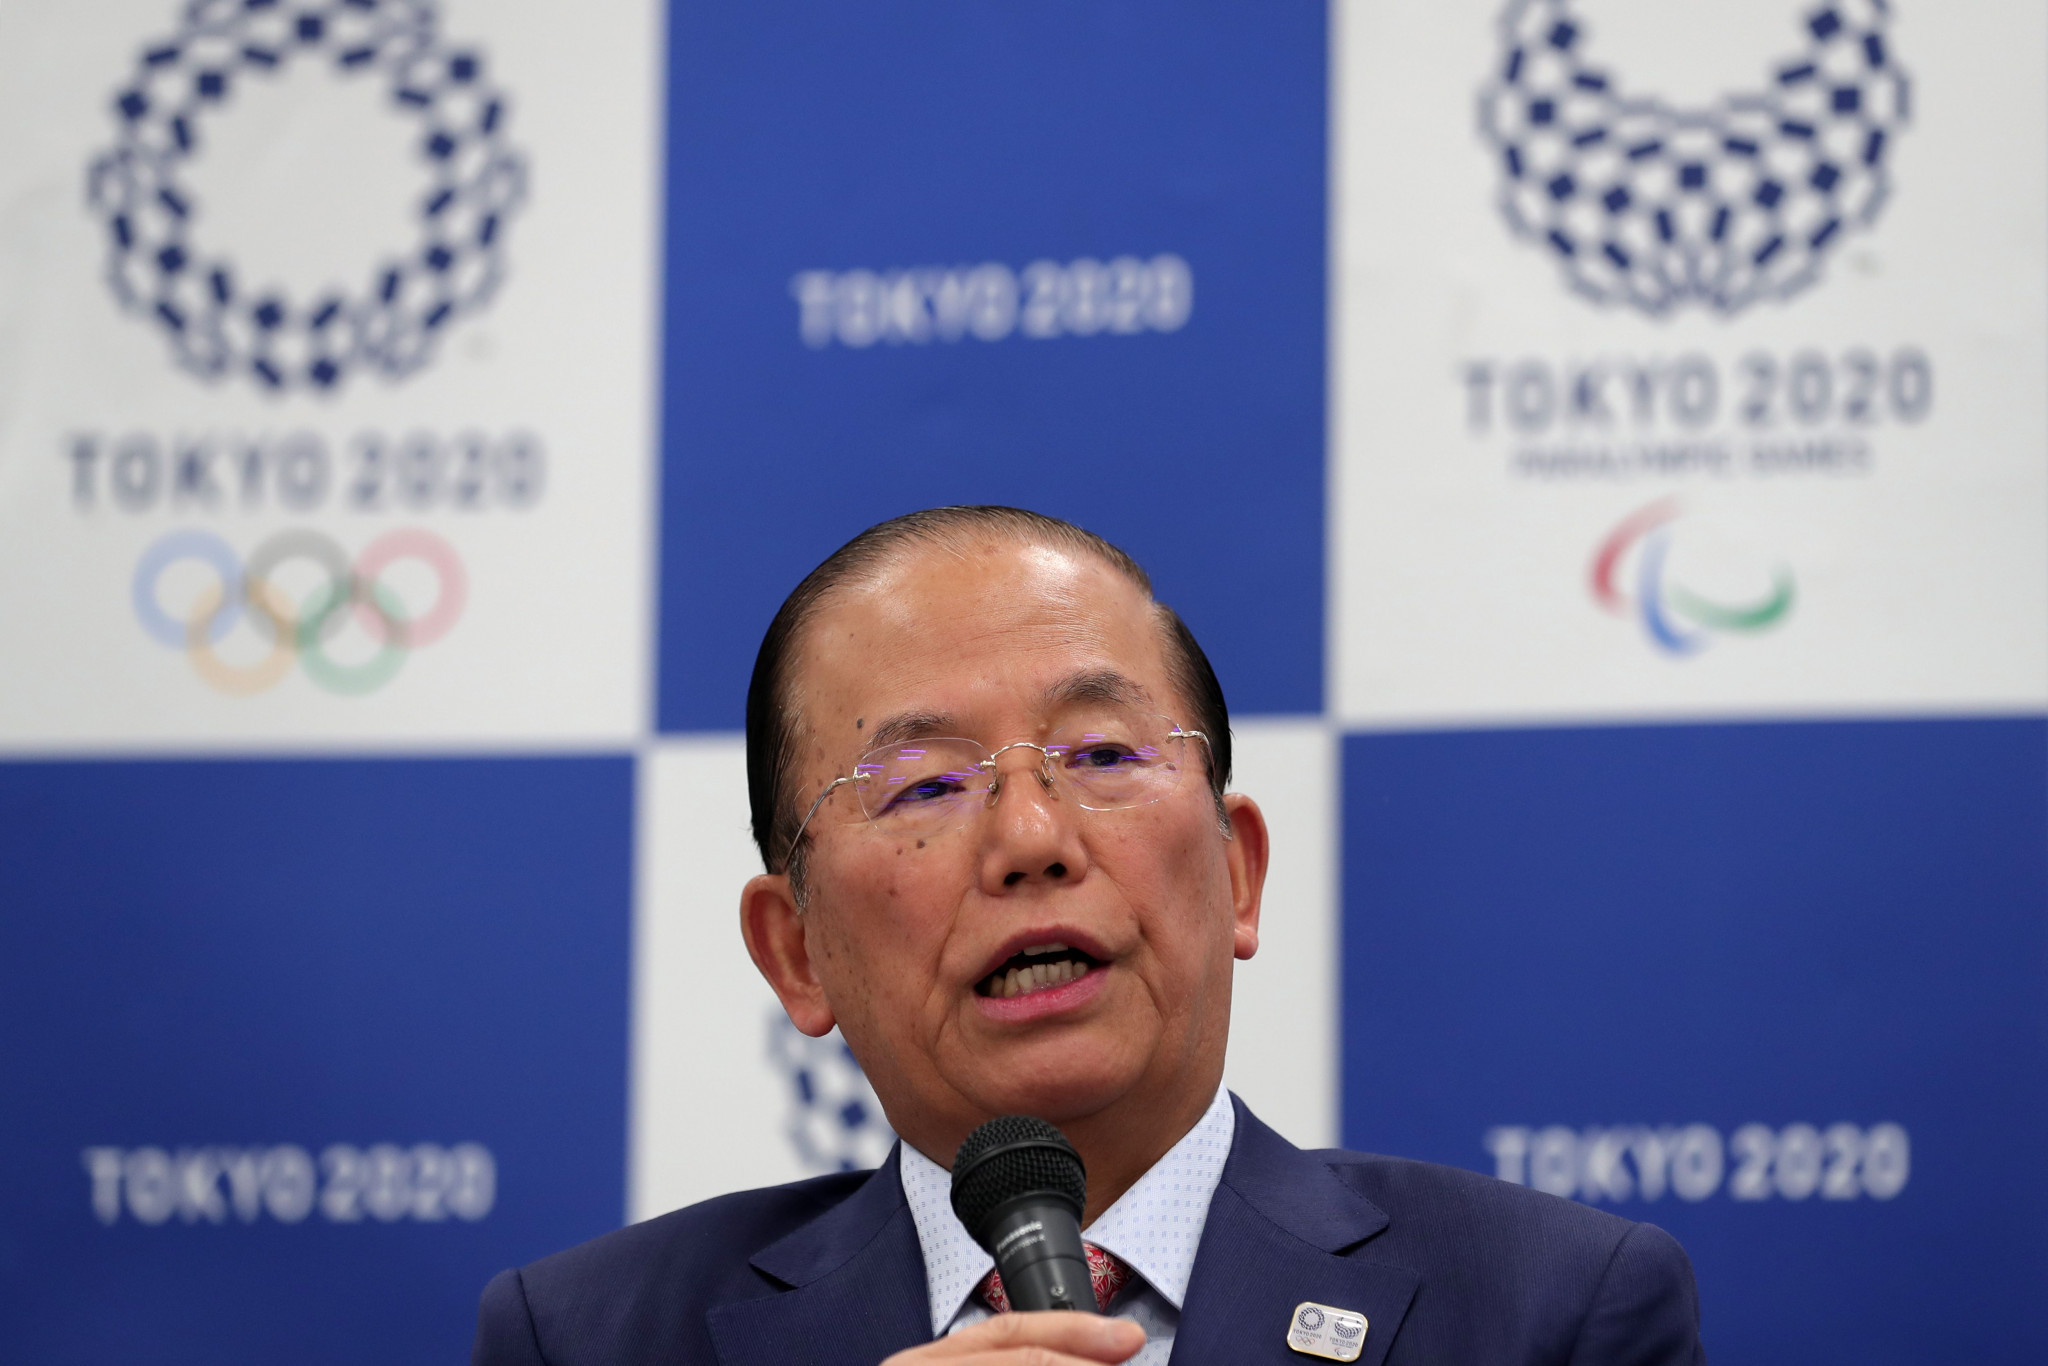 Tokyo 2020 chief executive Toshirō Mutō announced that they will start recruiting volunteers in September ©Getty Images